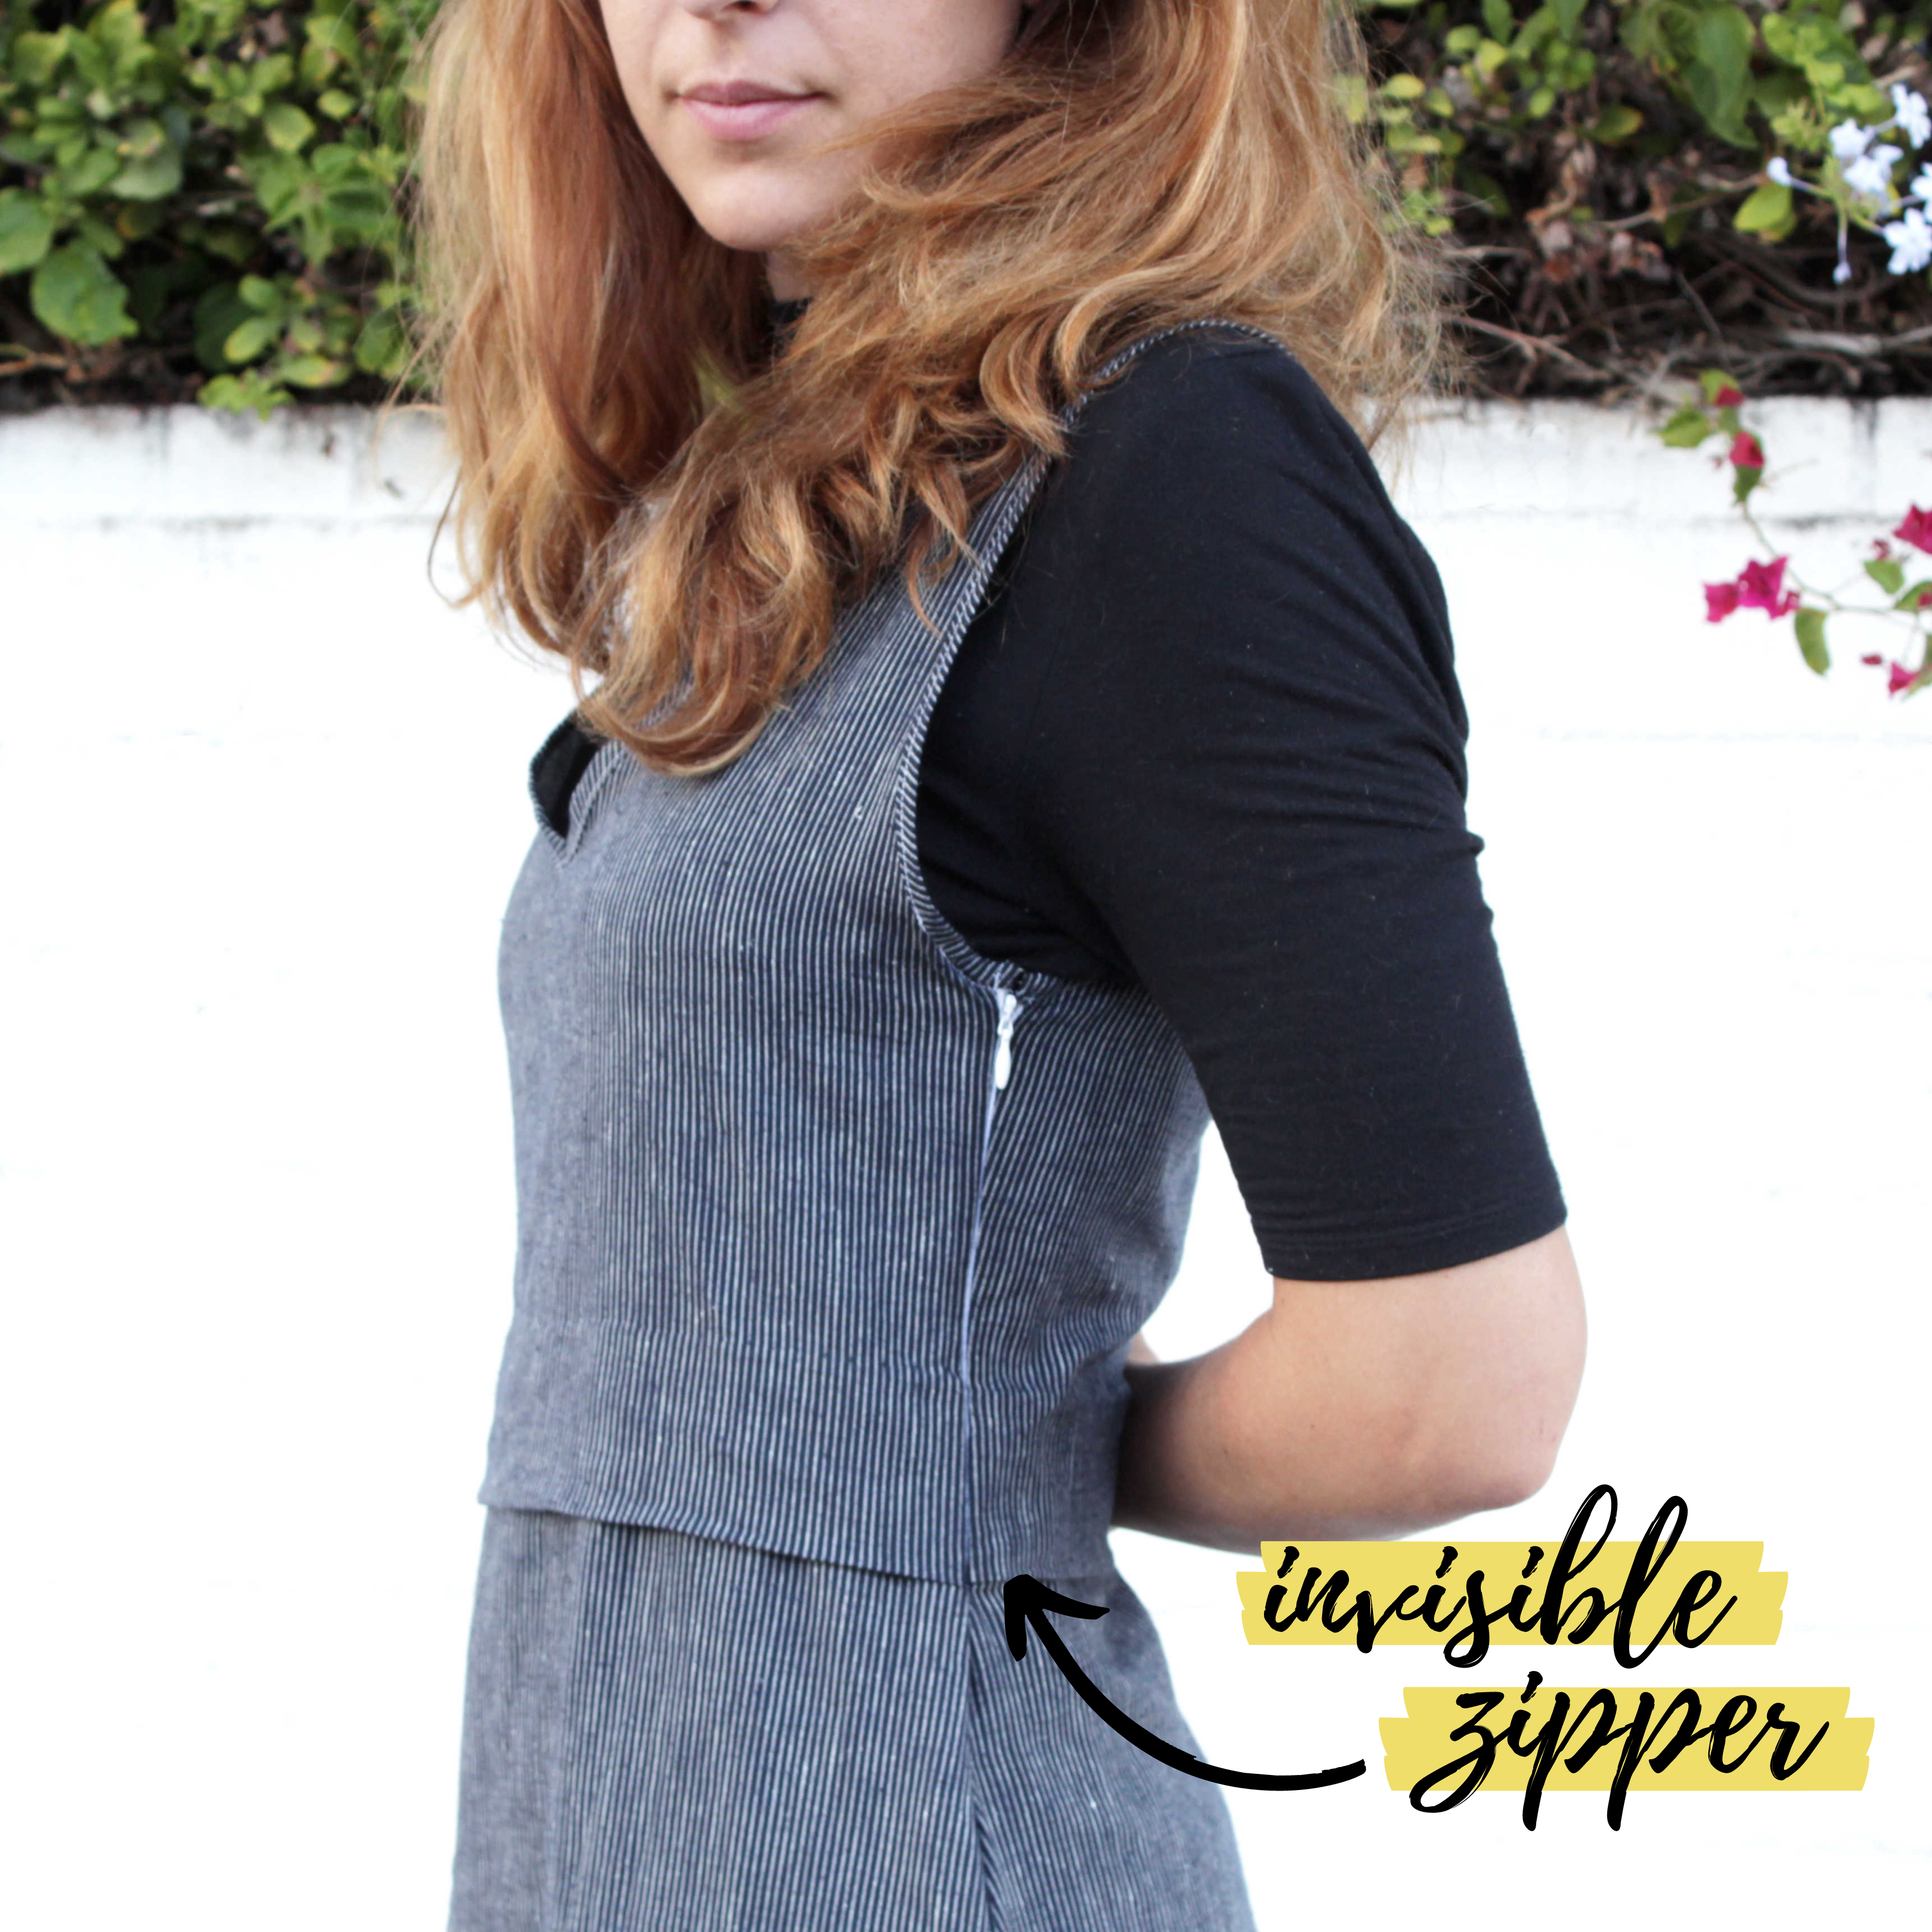 How To Sew An Invisible Zipper: The Teri Dress Sewing Tutorial